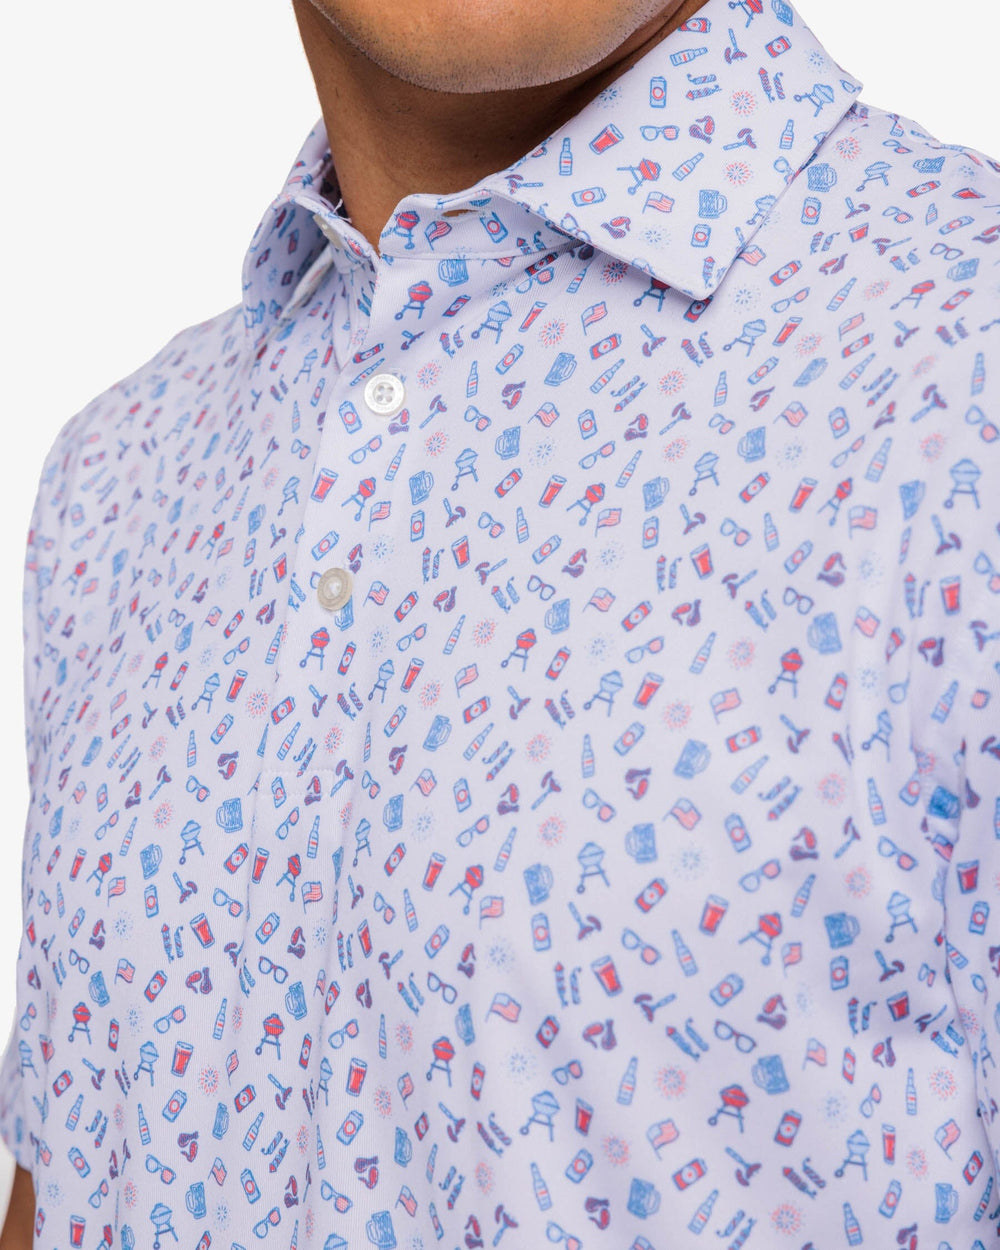 The detail view of the Southern Tide Backyard BBQ Polo Shirt by Southern Tide - Classic White